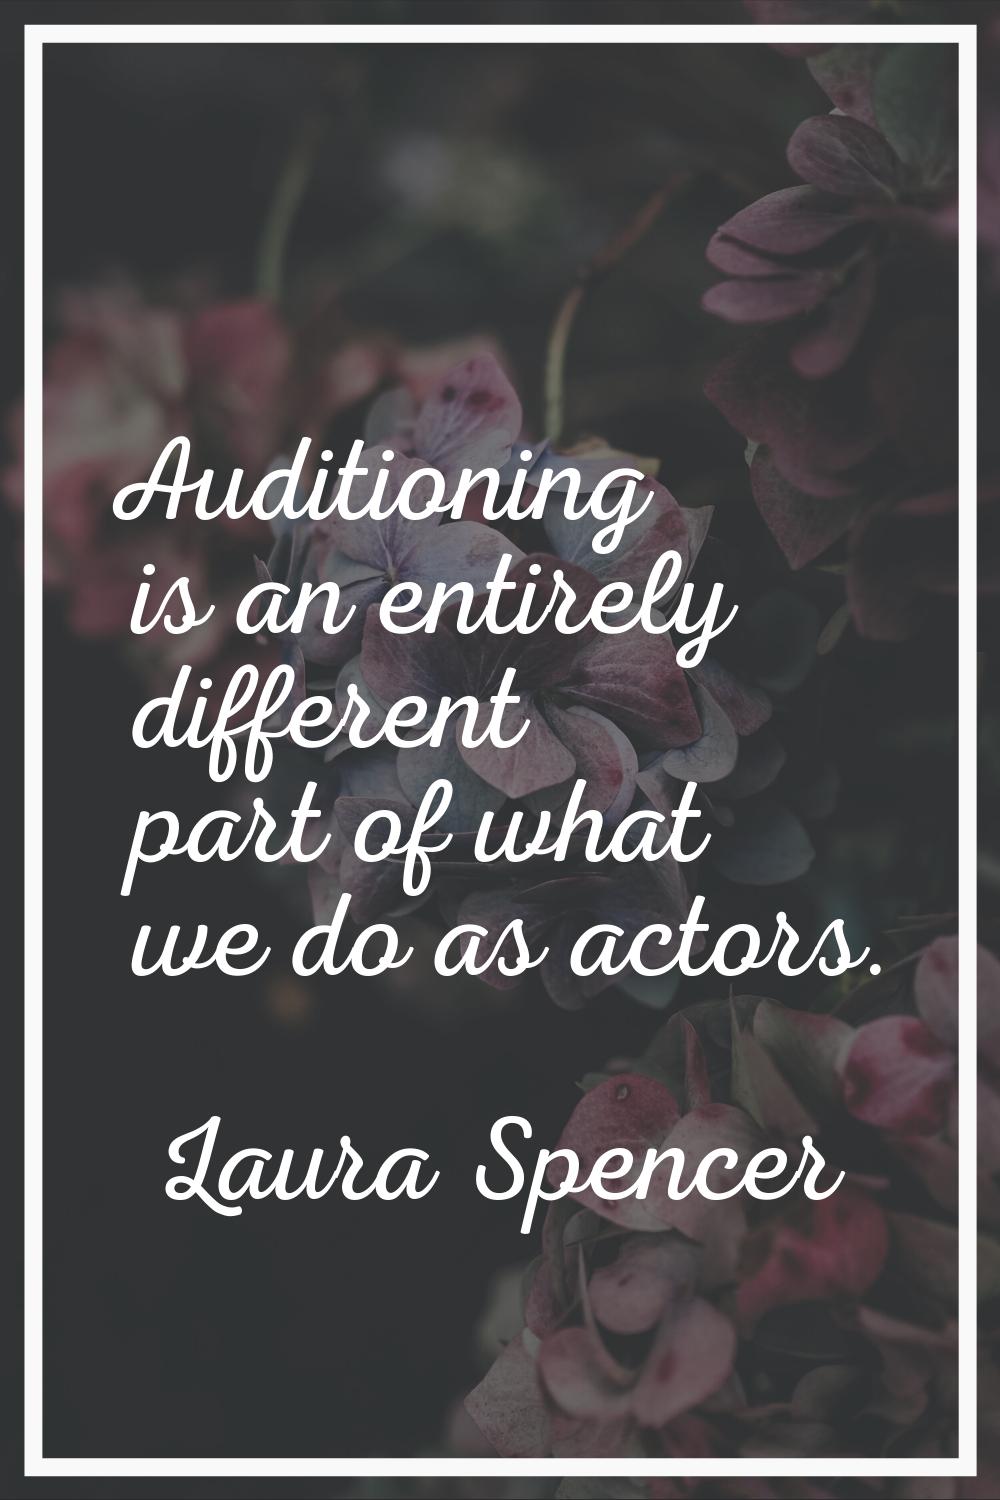 Auditioning is an entirely different part of what we do as actors.